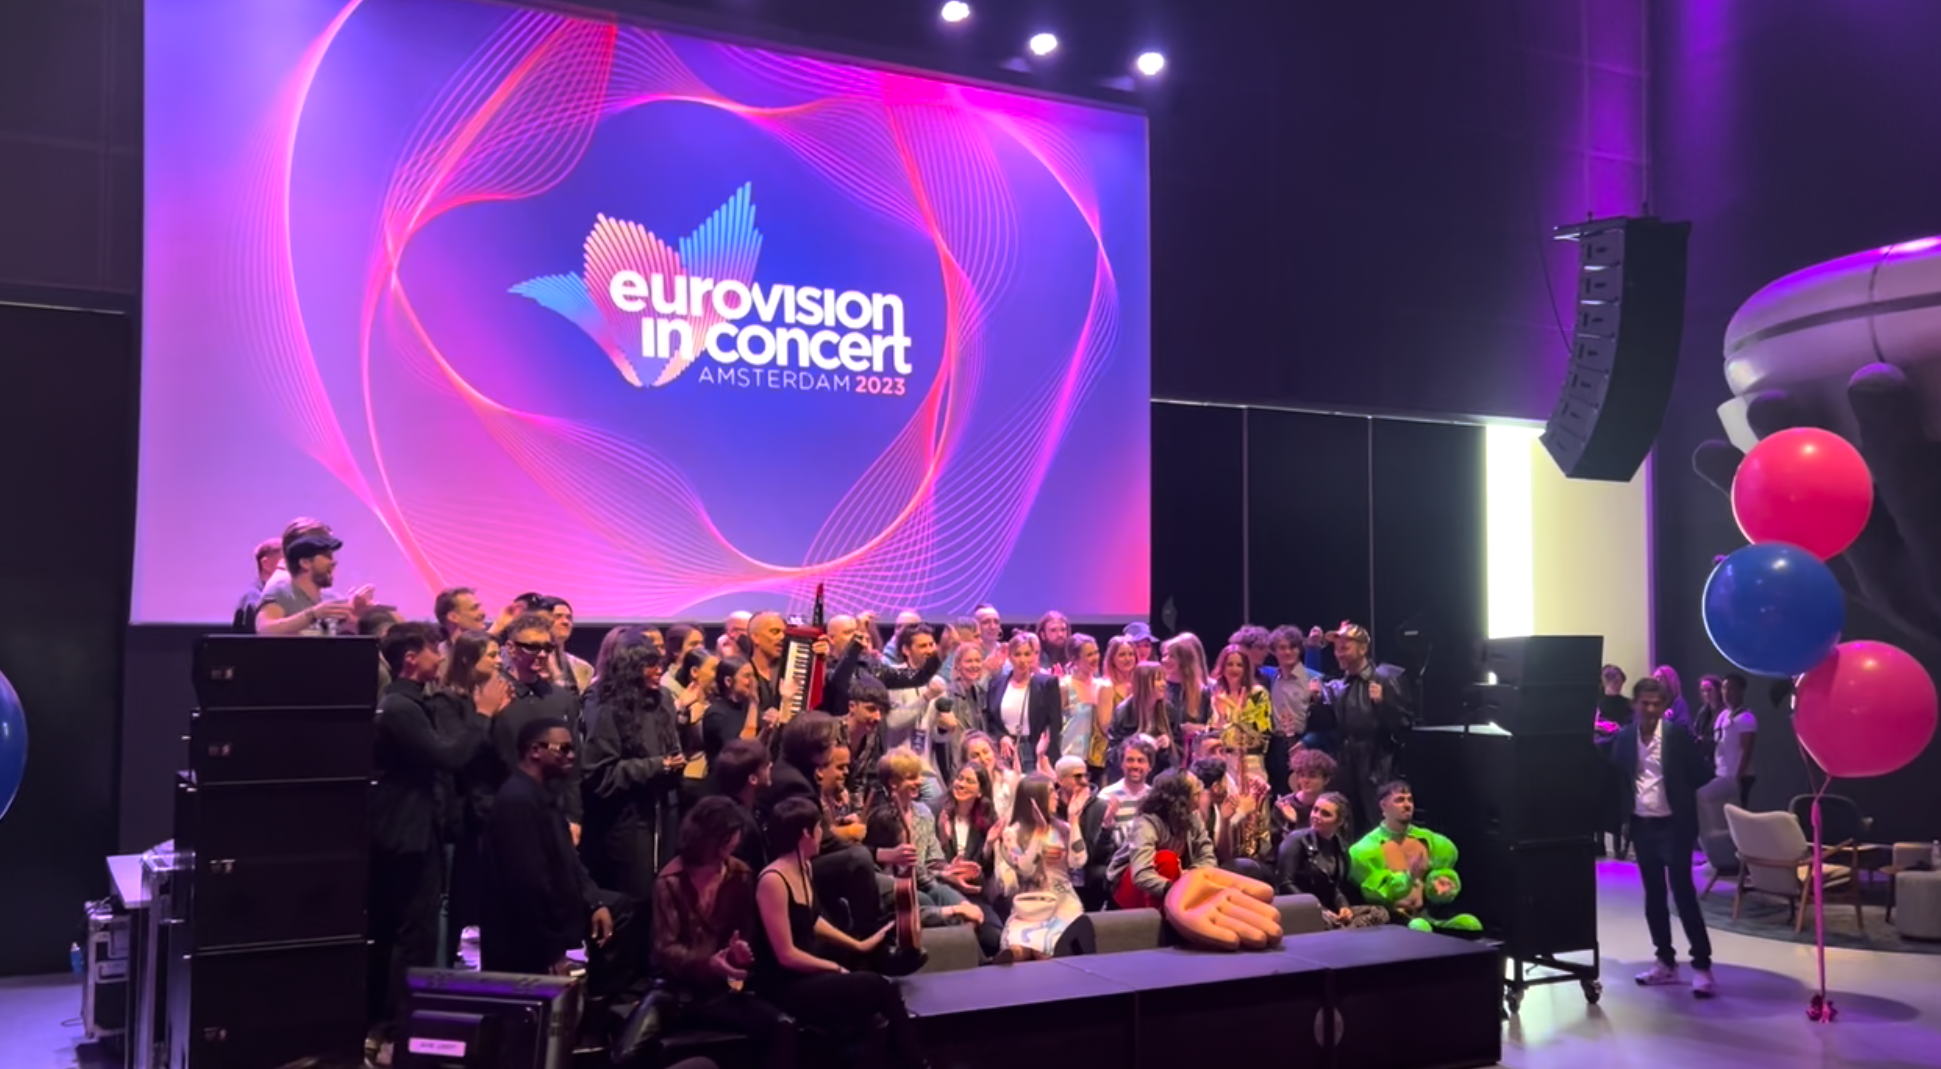 The biggest Eurovision Pre-Party – Eurovision in Concert 2023 in Amsterdam